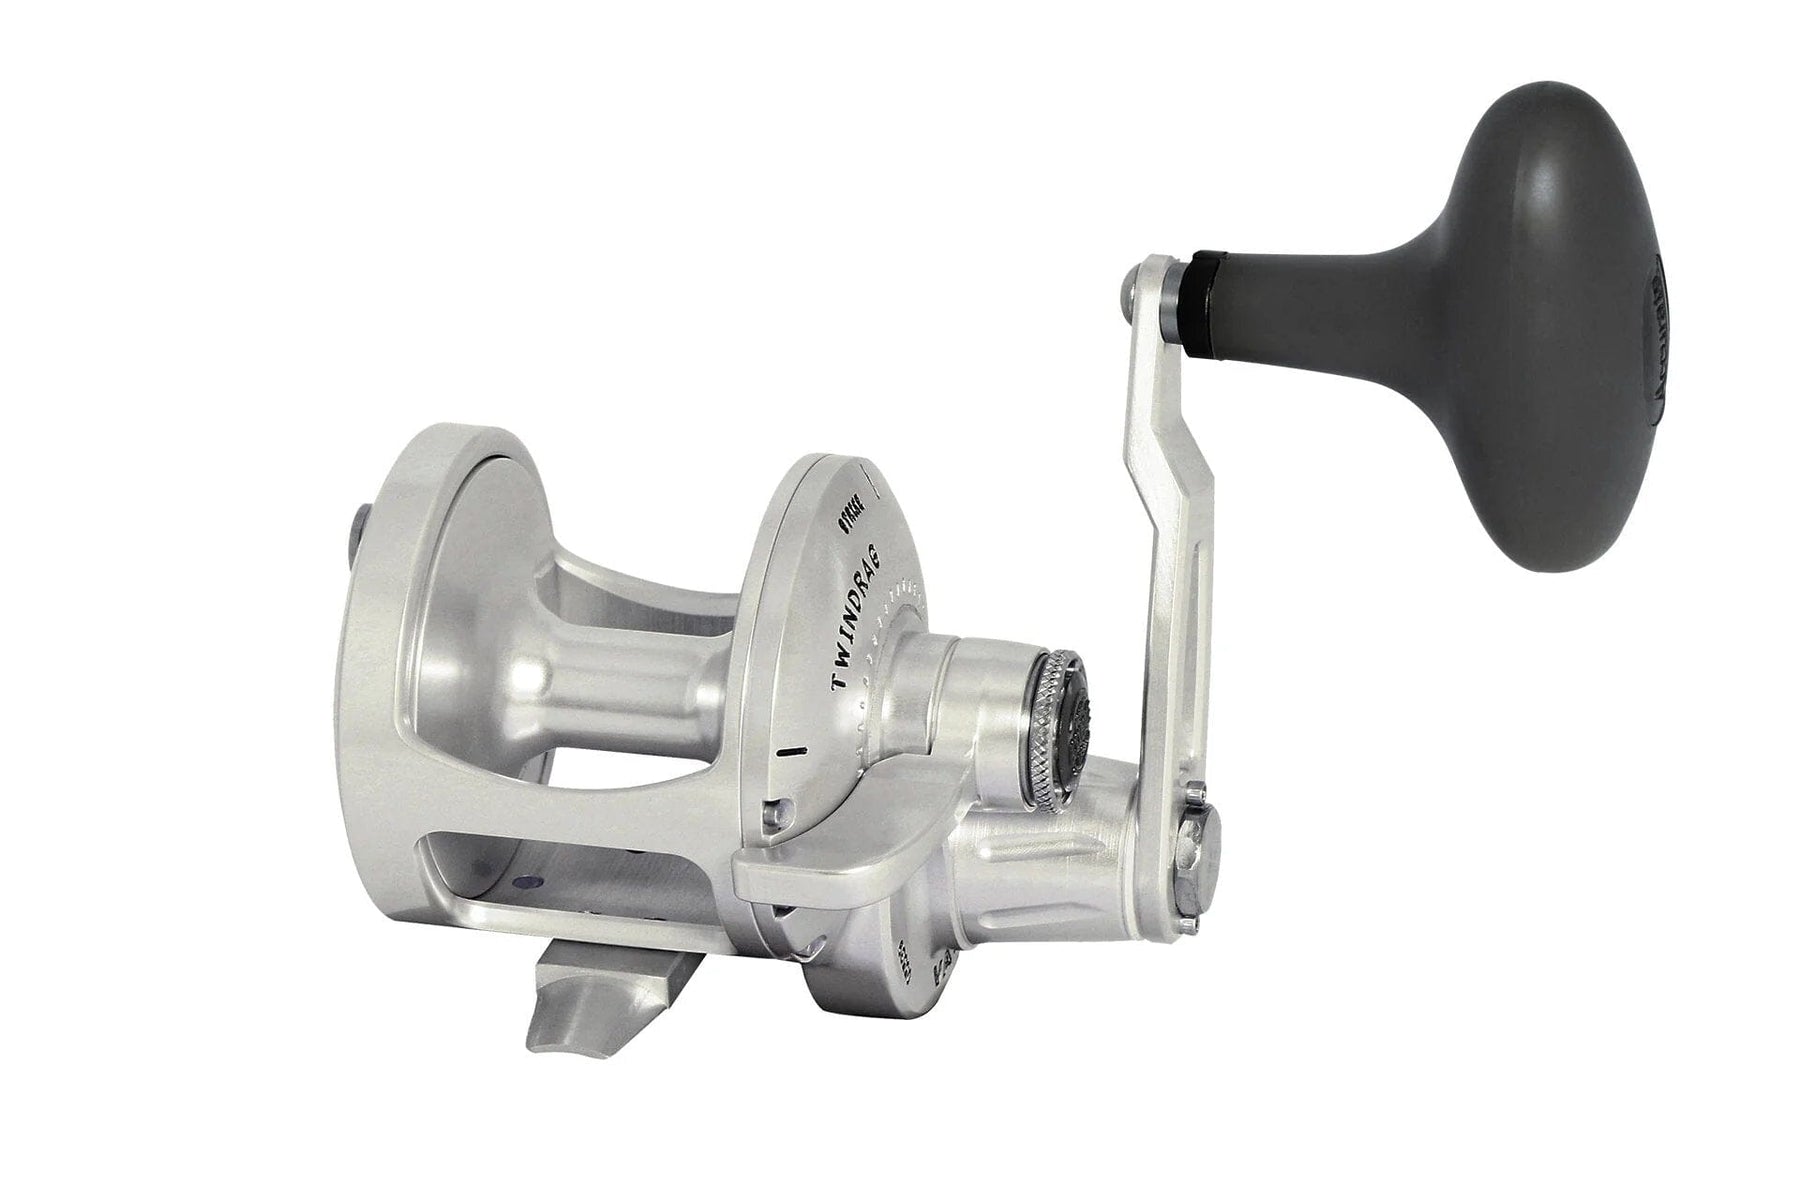 Accurate Valiant Reel - BV-500-S Silver